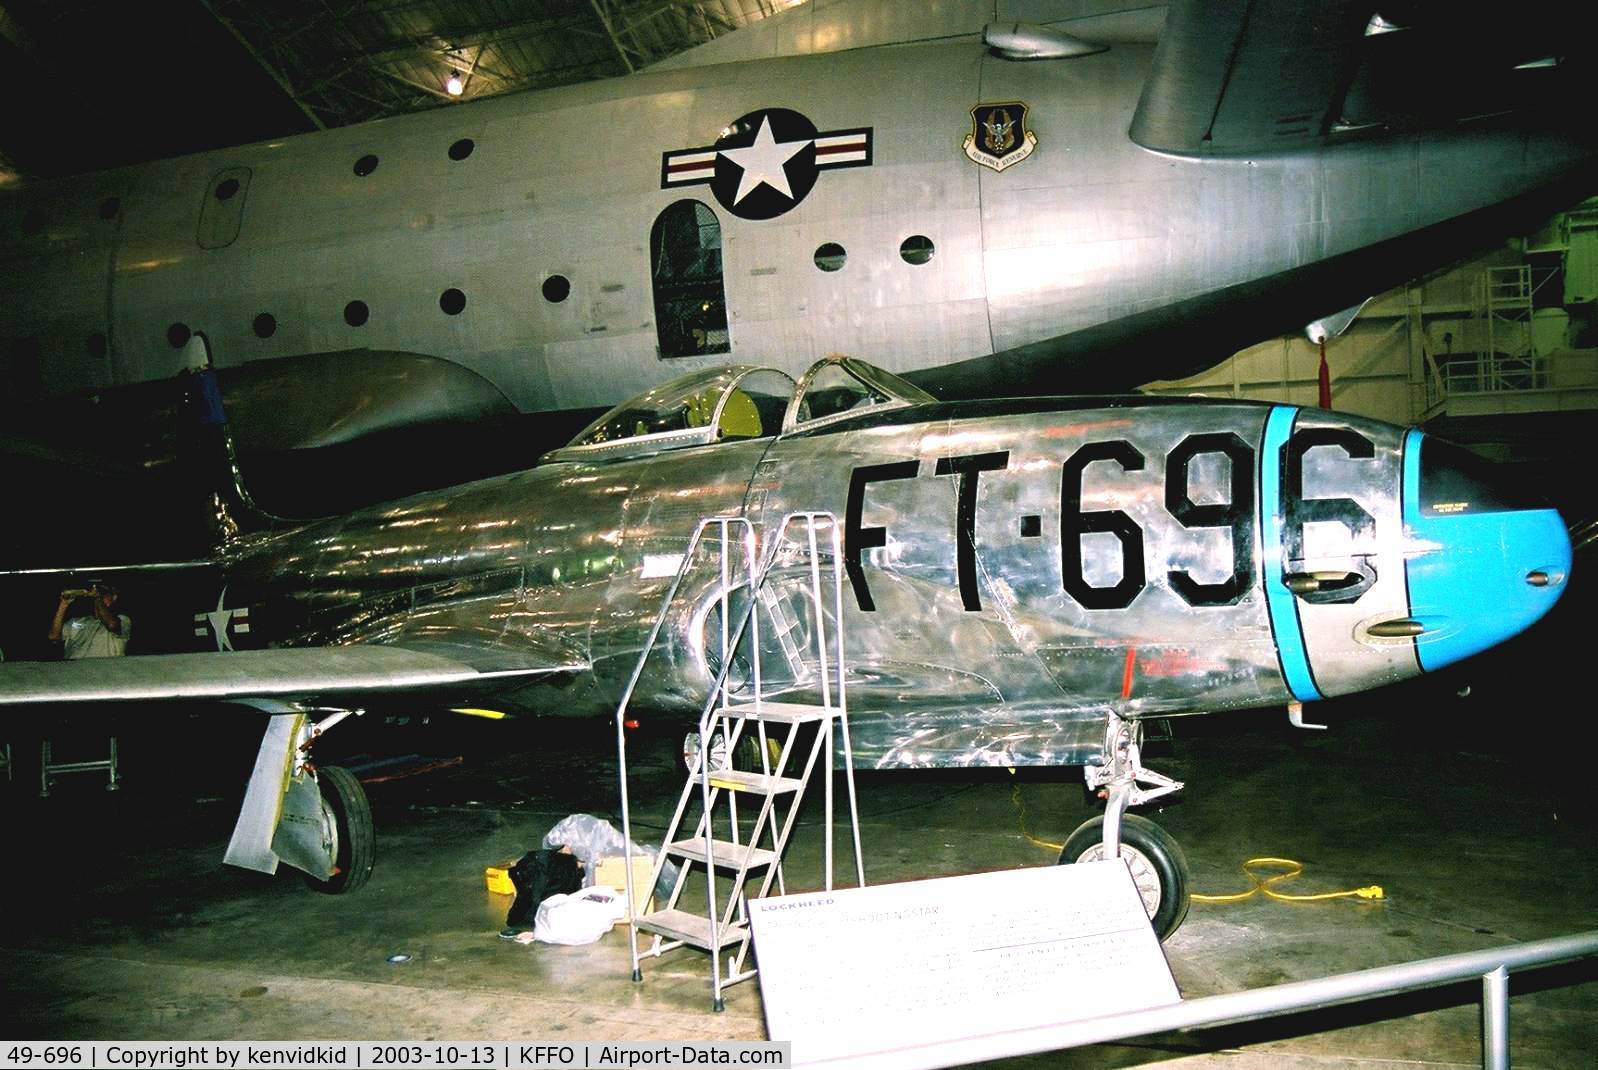 49-696, 1949 Lockheed F-80C-10-LO Shooting Star C/N 080-2340, At The Museum of the United States Air Force Dayton Ohio.